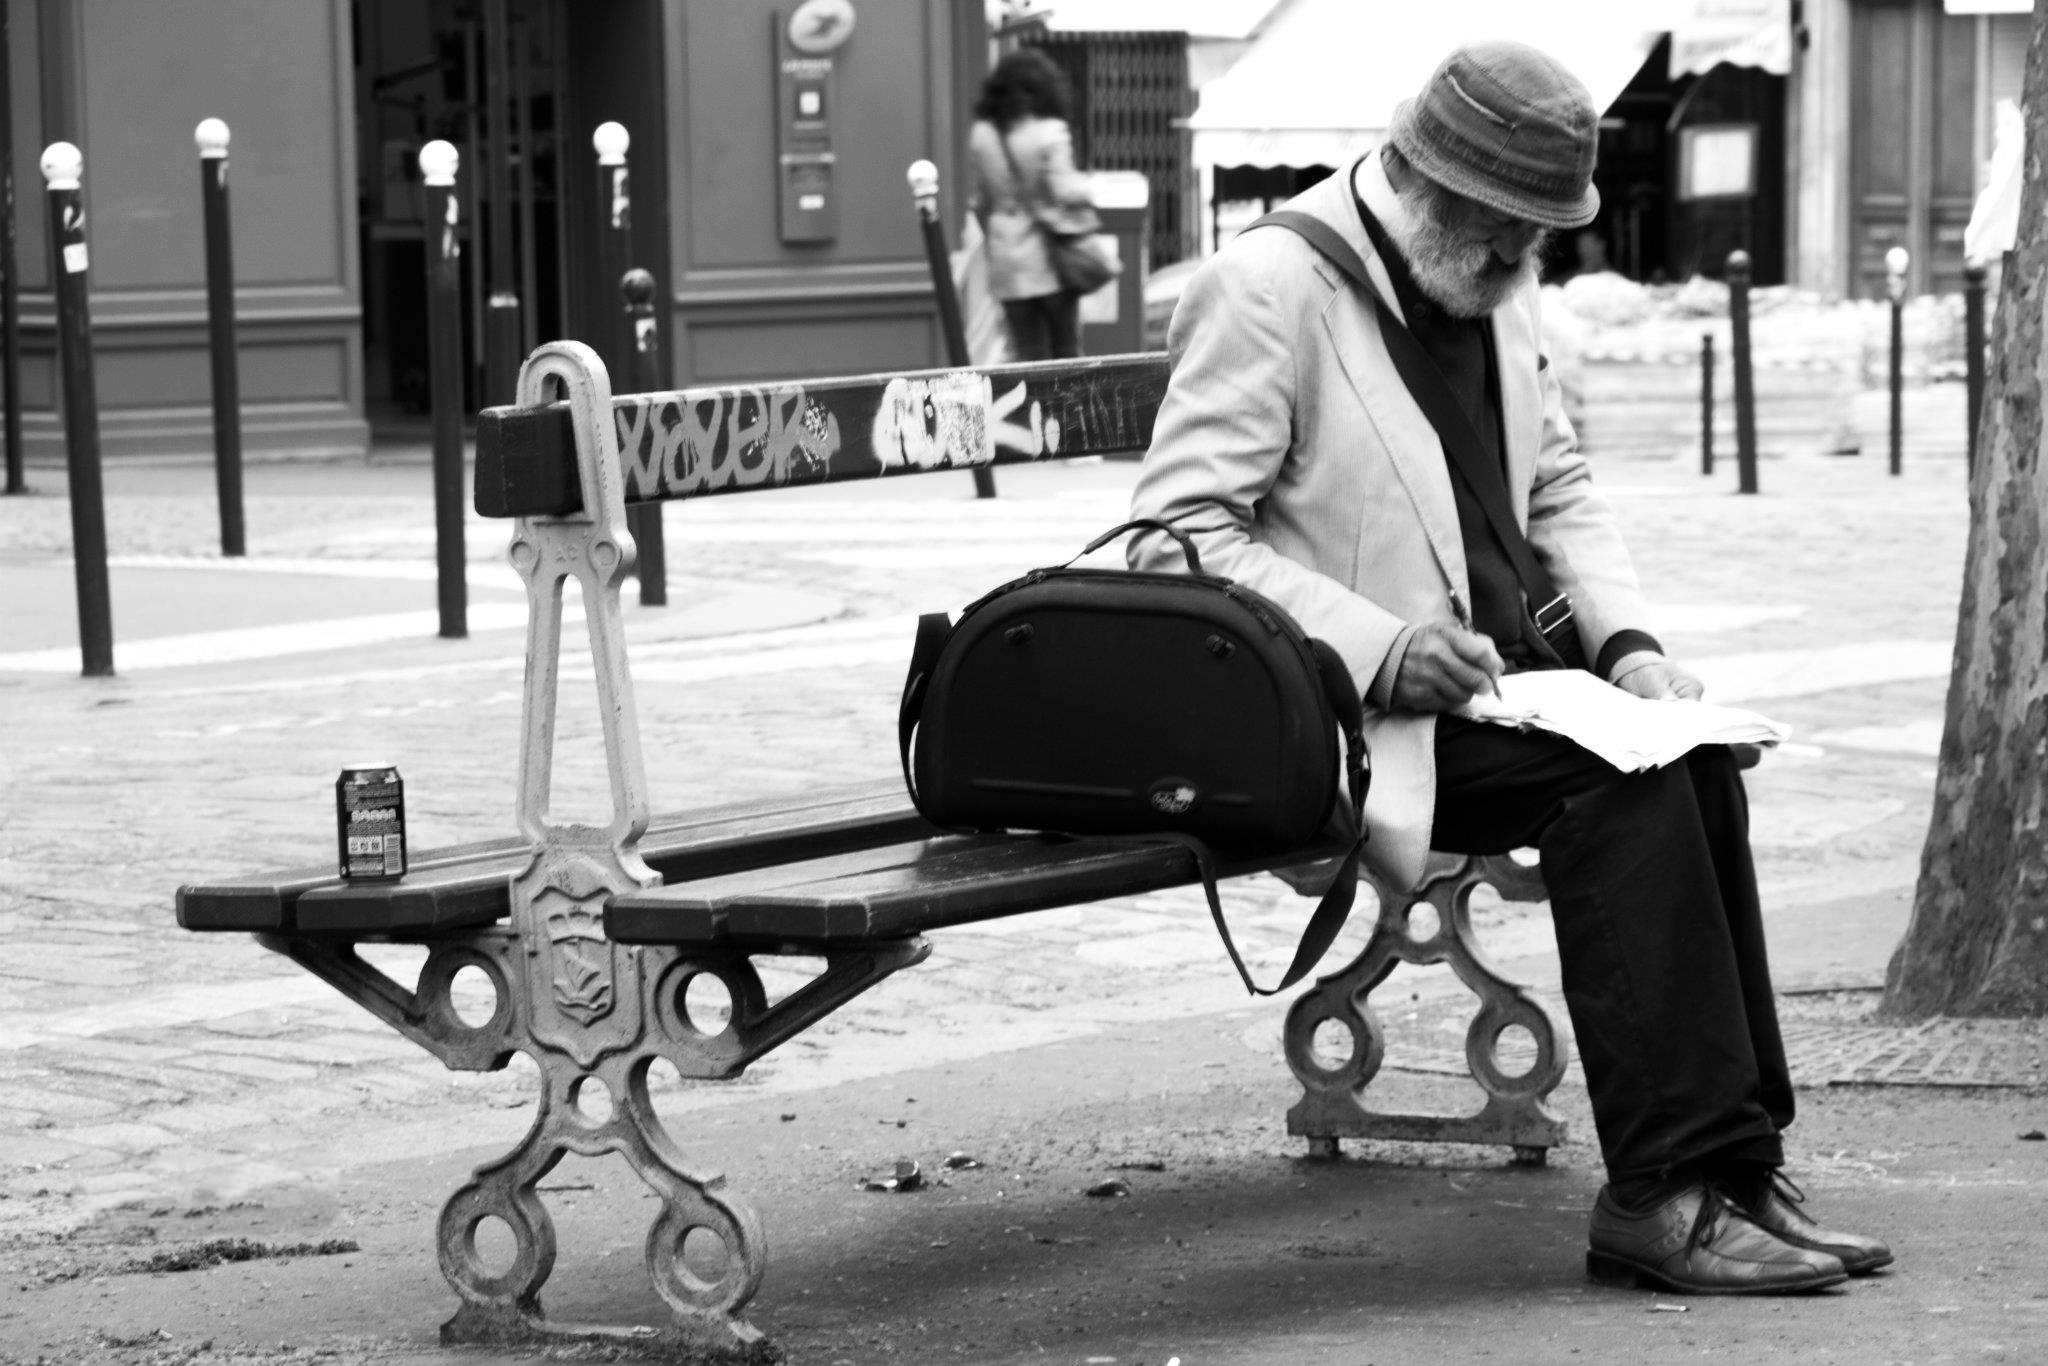 a man sitting on a bench reading a paper